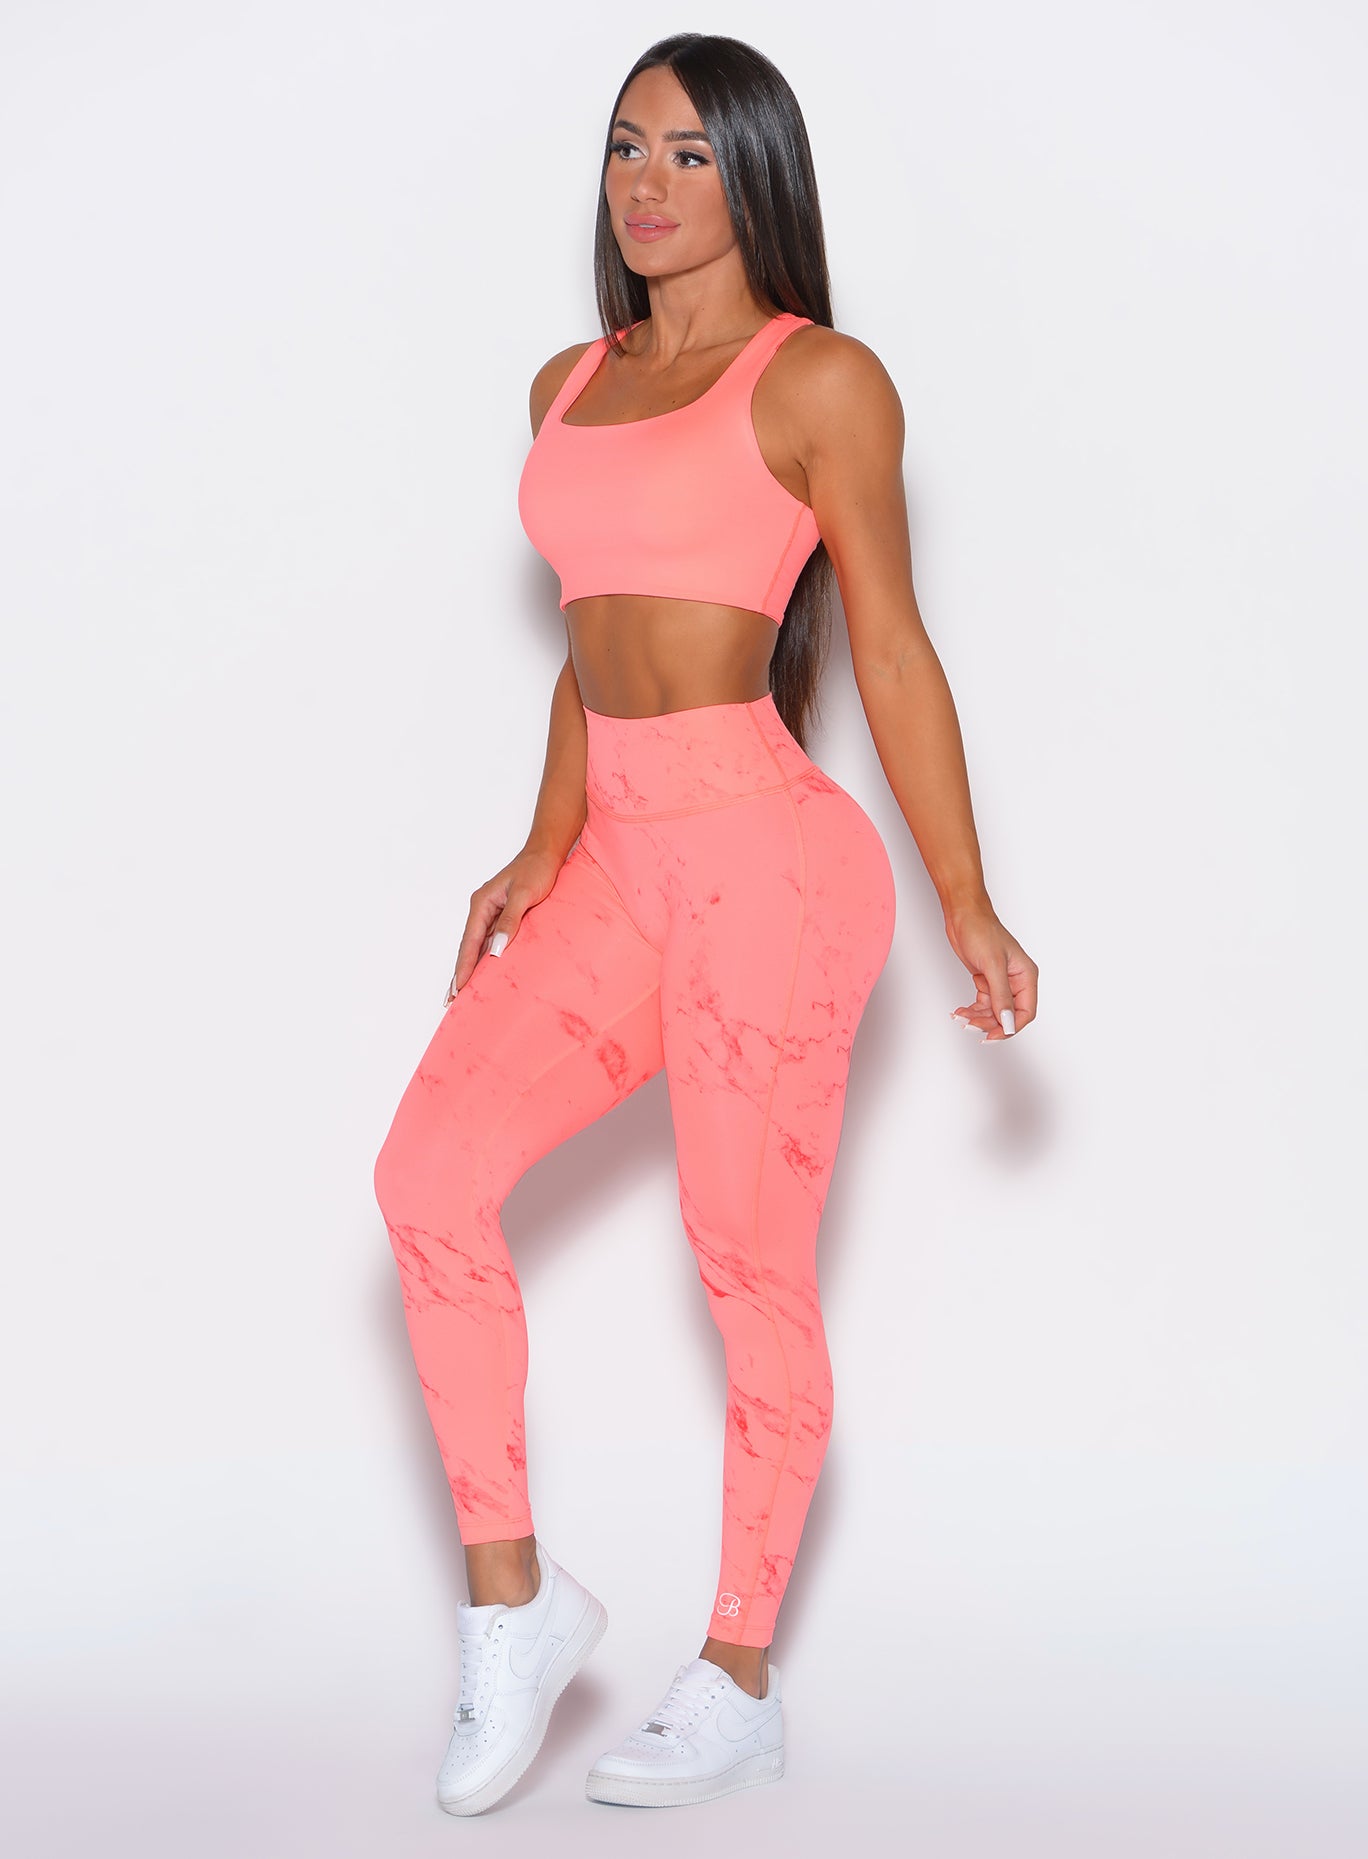 left side profile view of a model angled slightly to her left wearing our fit marble leggings in Coral reef color along with a matching bra